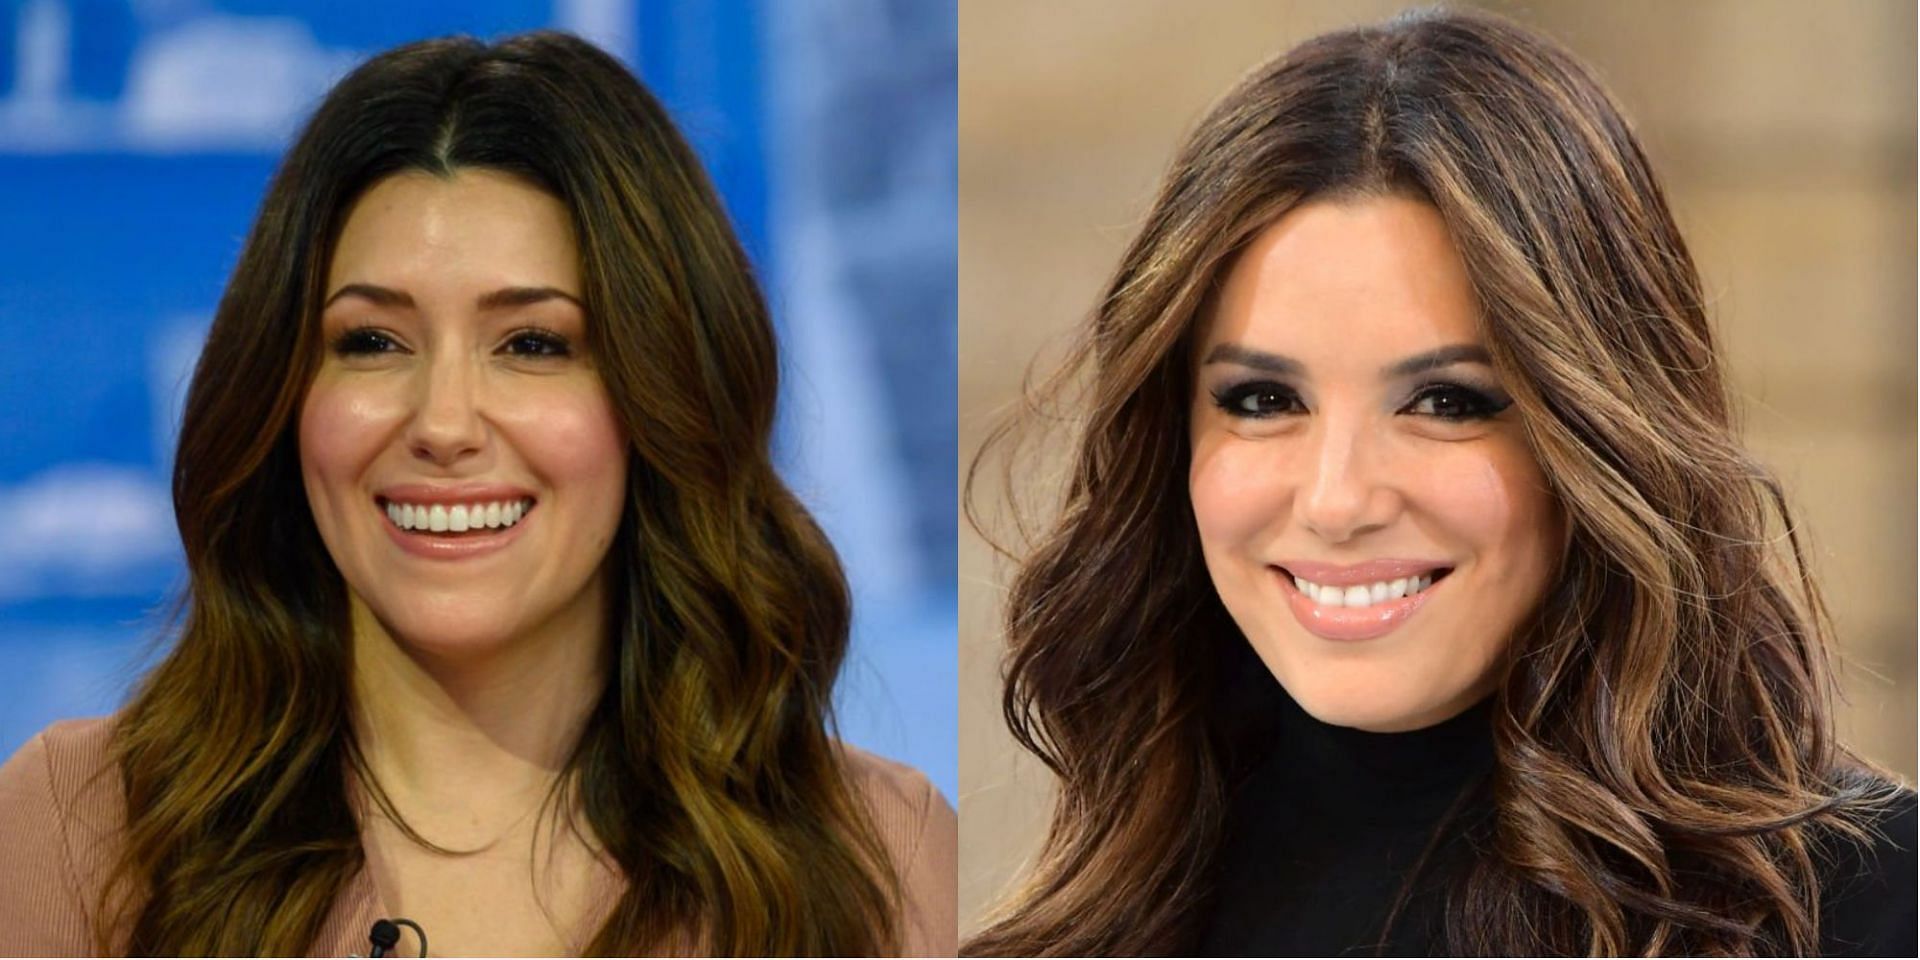 Camille Vasquez revealed she would like Eva Longoria to play her role in a film (Image via Getty Images)